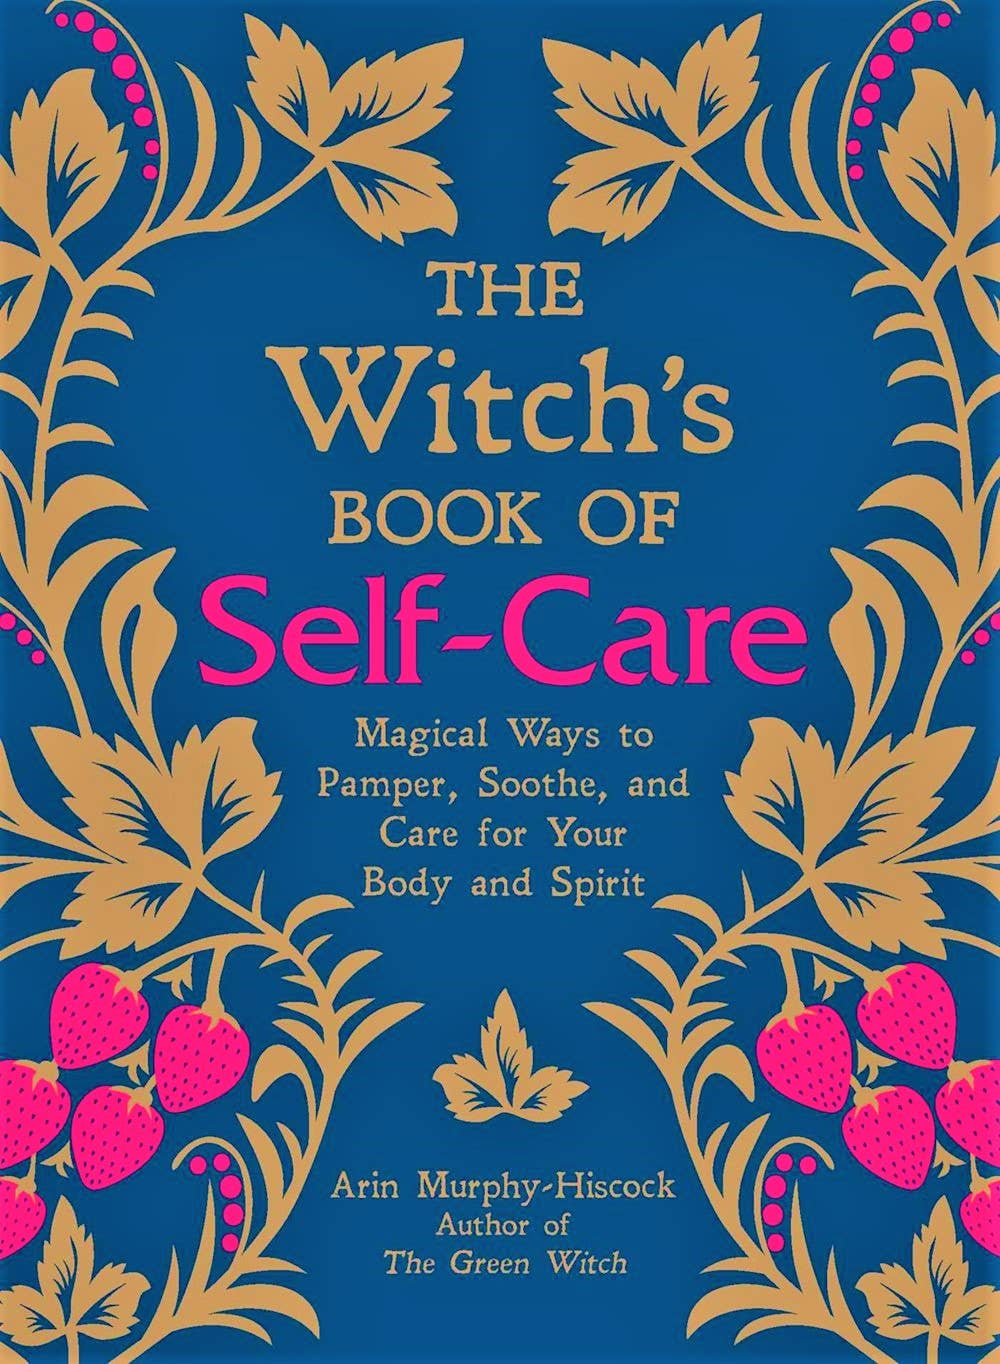 Witch's Book of Self-Care: Magical Ways to Pamper, Soothe, and Care for Your Body and Spirit